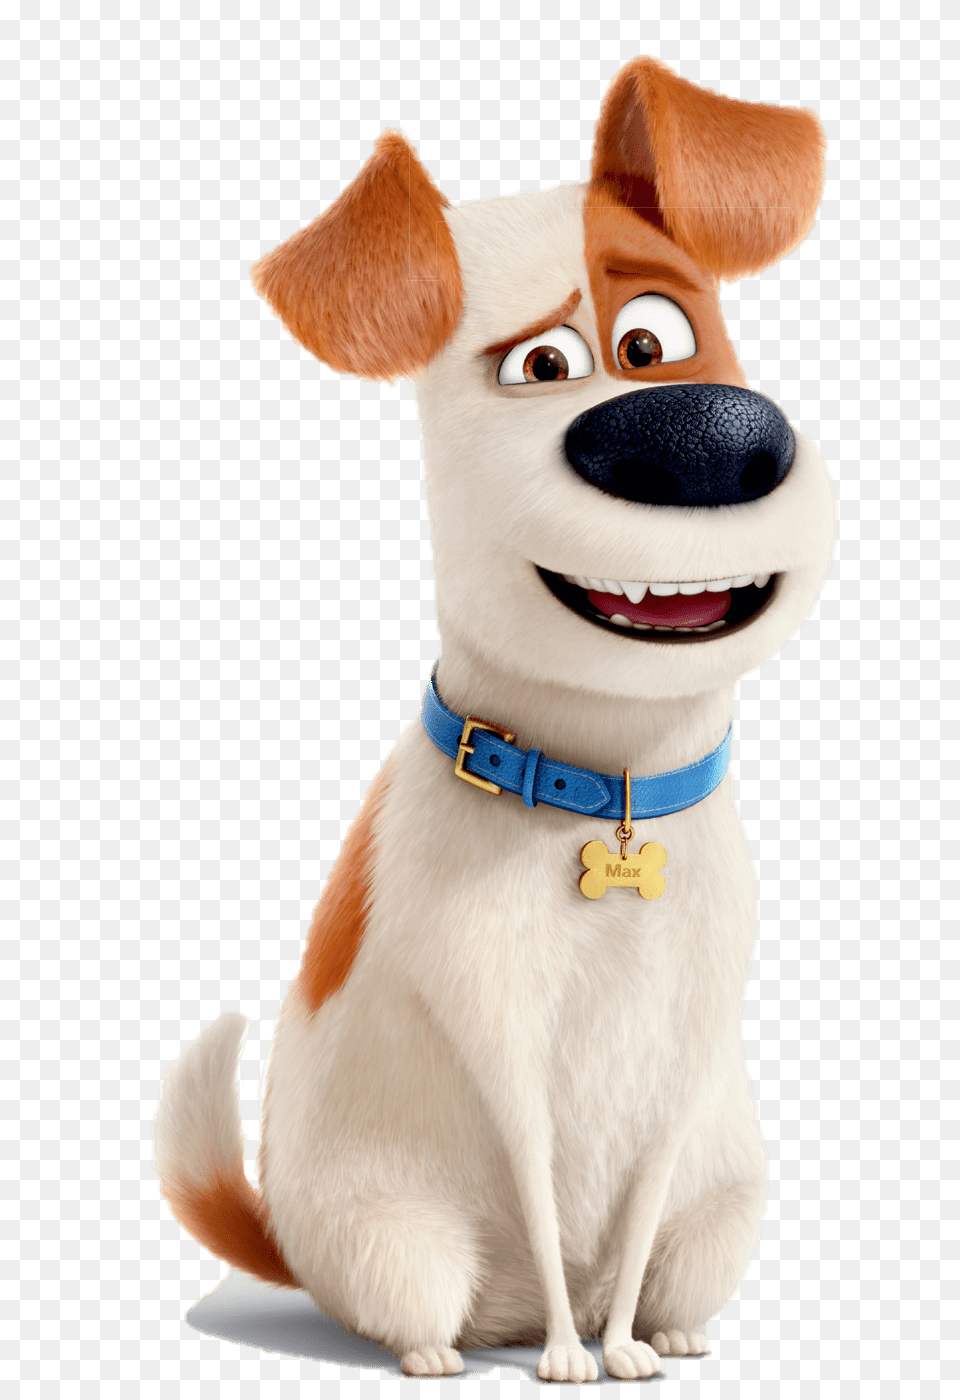 The Secret Life Of Pets Max Listening, Toy, Accessories Png Image